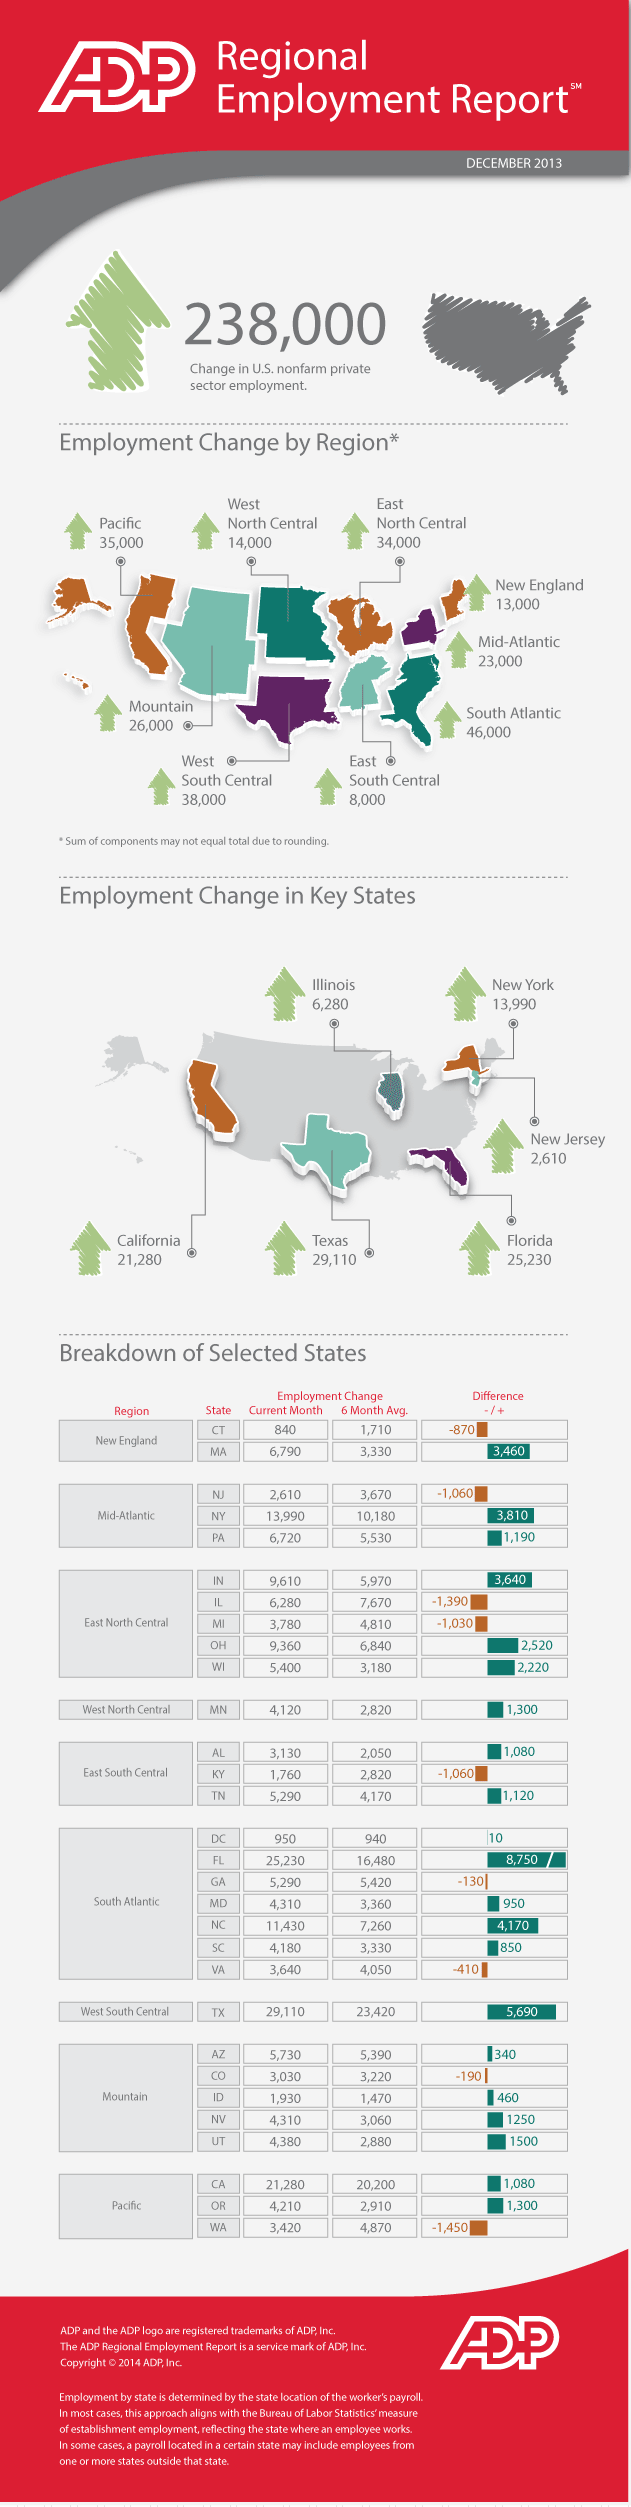 Texas and Florida Lead Growth Among Large States From November to December  Infographic